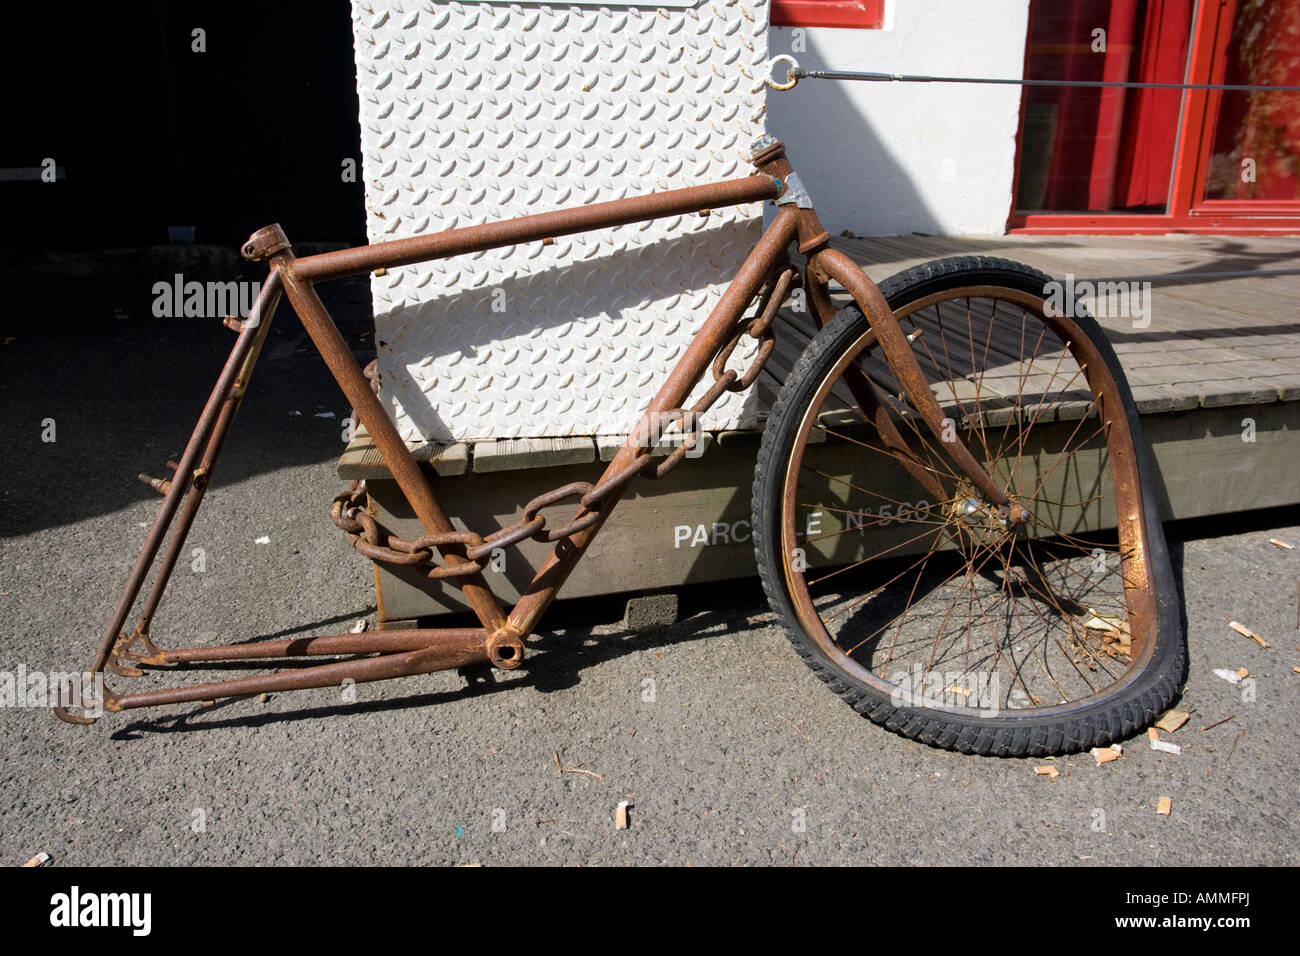 rusty-bicycle-frame-with-one-wheel-locked-to-wall-brittany-france-AMMFPJ.jpg